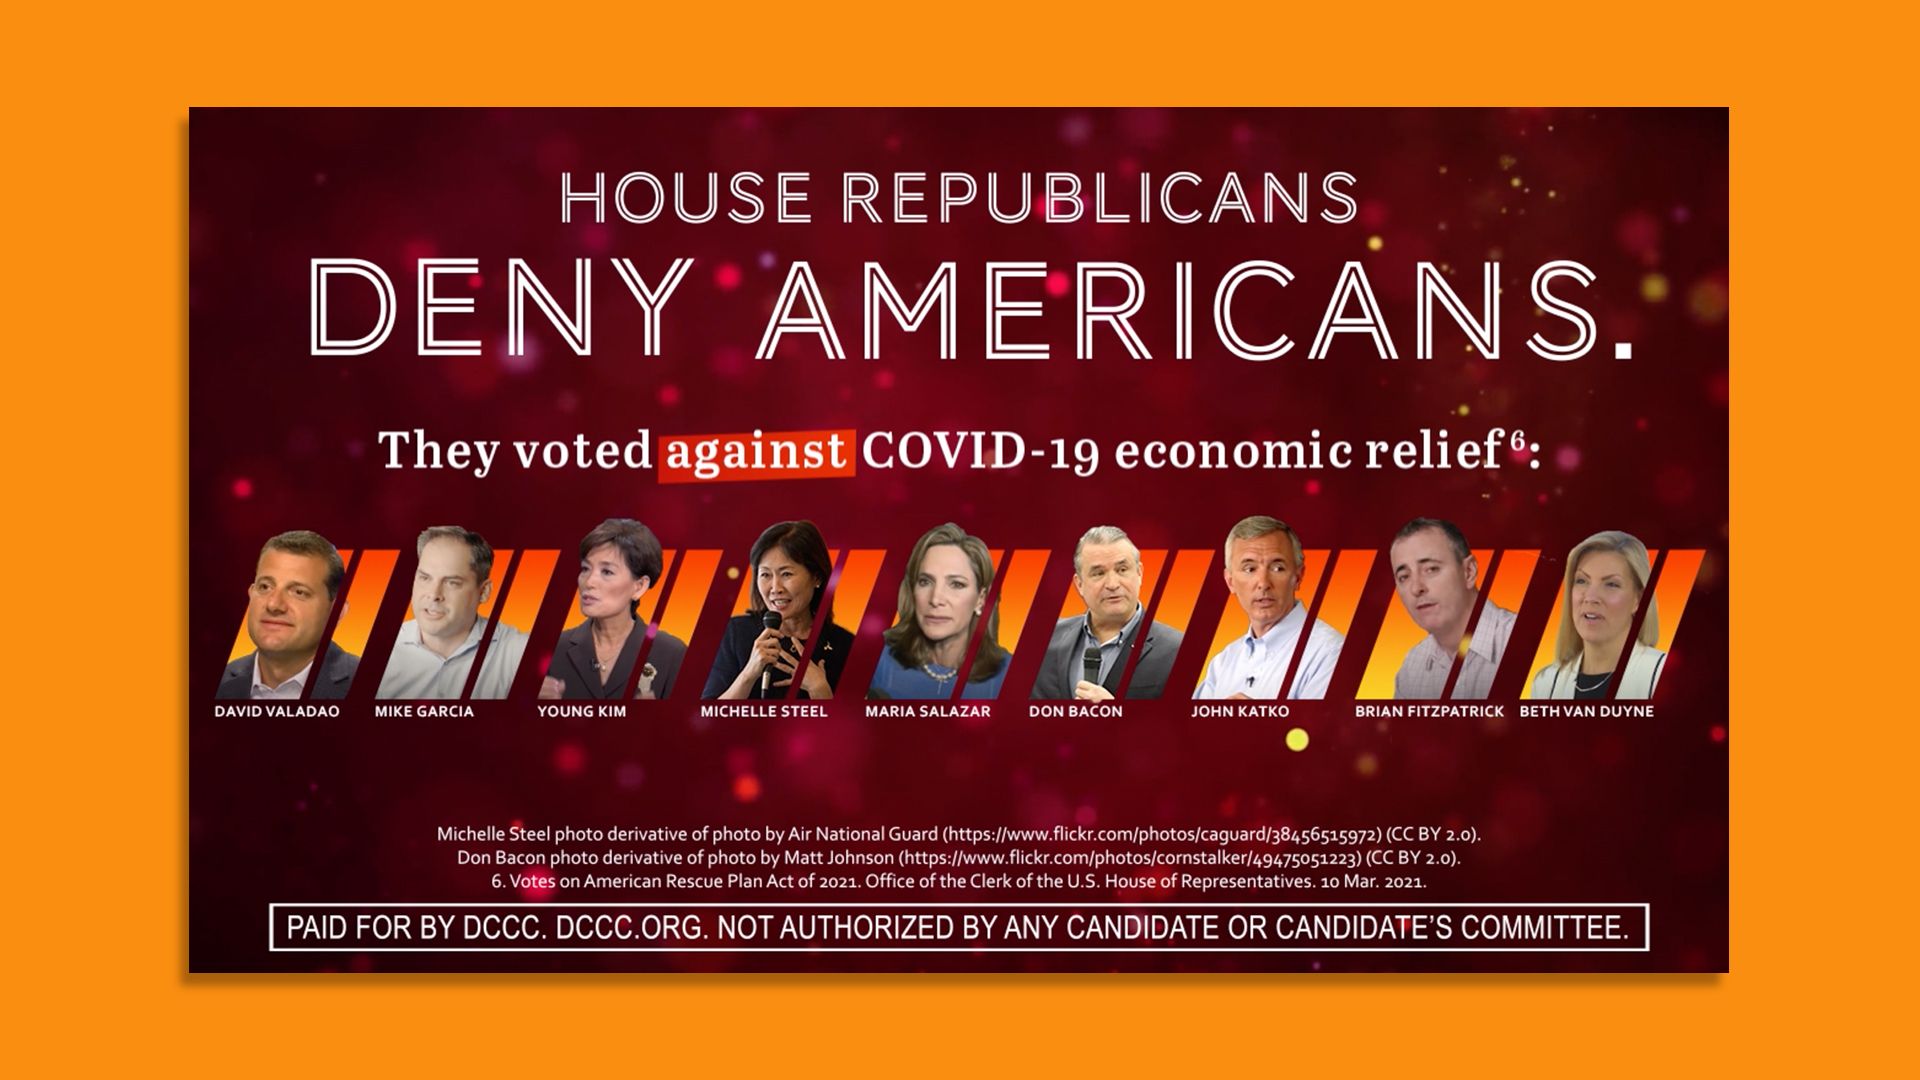 A screenshot shows a Democratic Congressional Campaign Committee ad campaign against House Republicans.